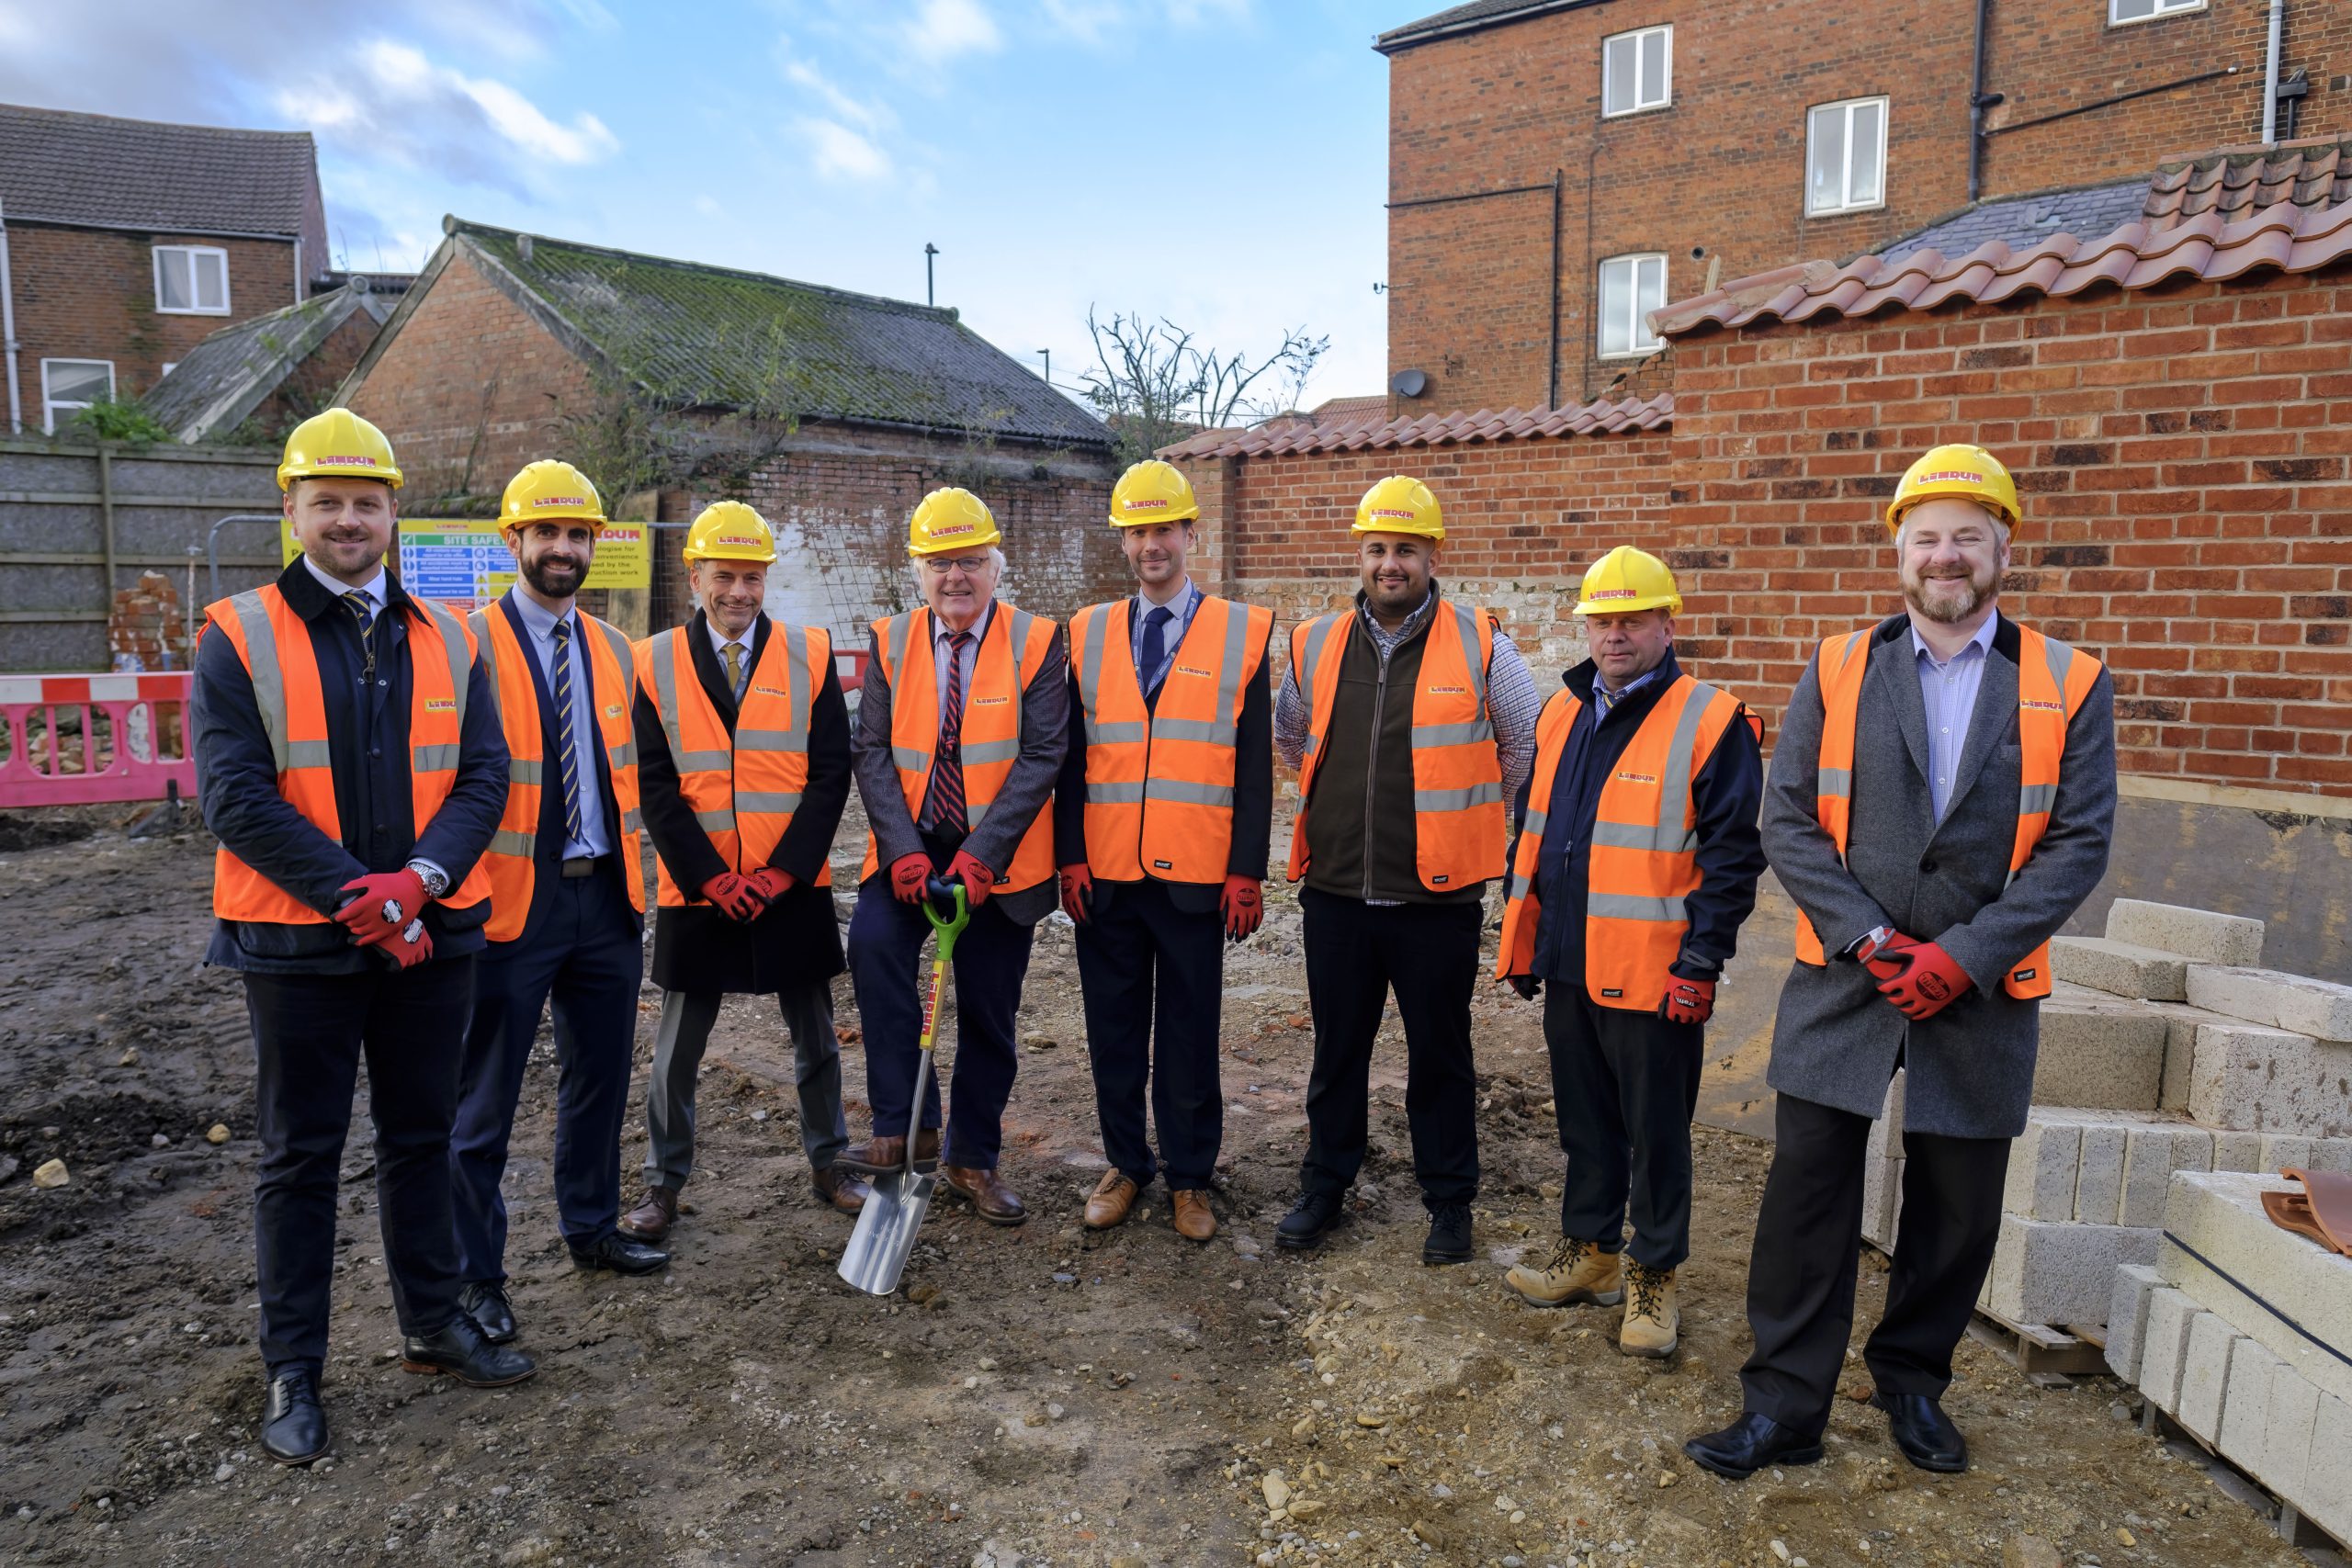 ‘Ground-cutting’ marks start of project to bring new homes to South Kesteven